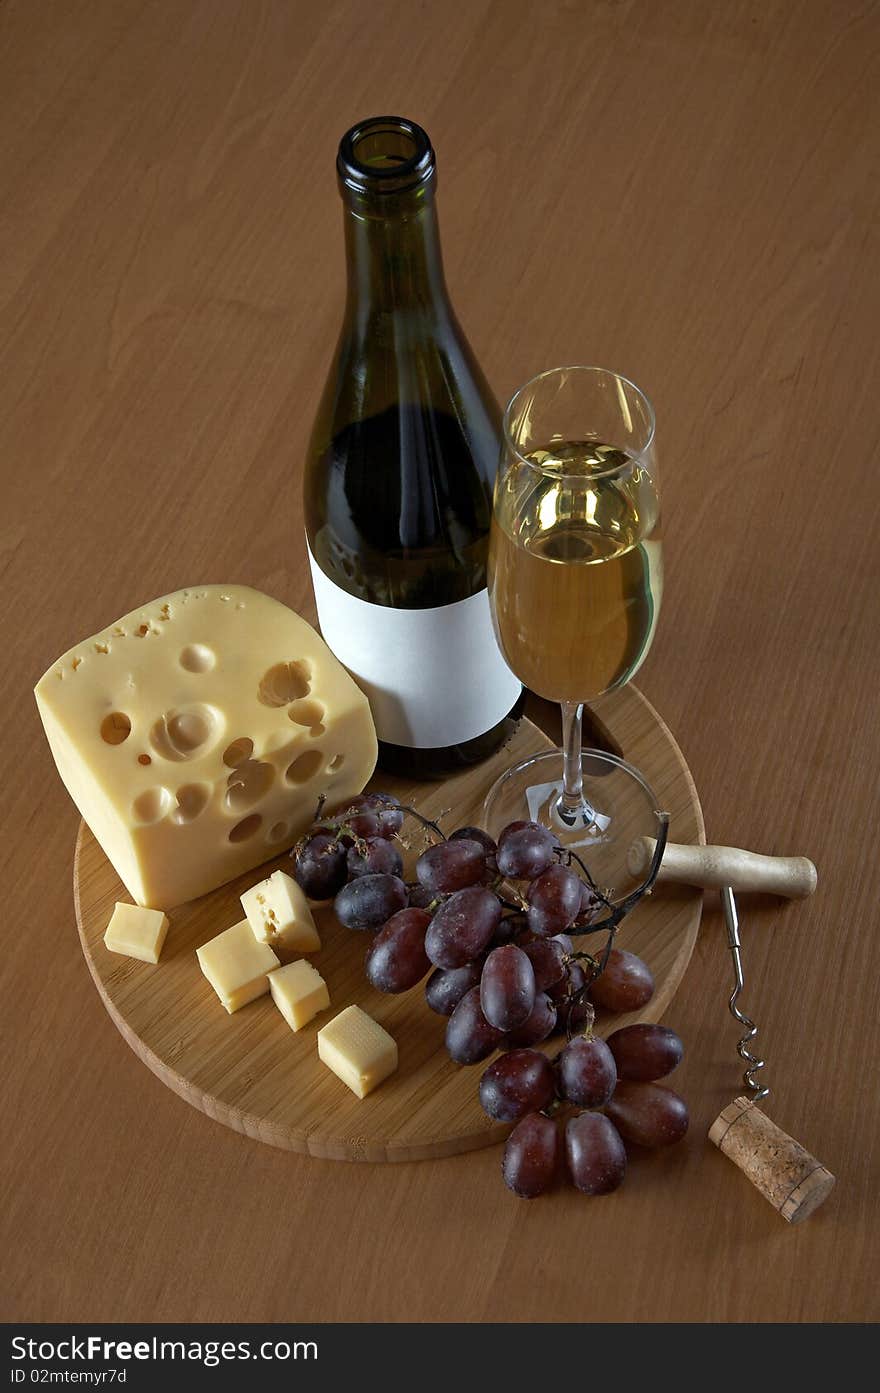 Bottle and glass of white wine with cheese, grapes, a cork and a corkscrew on a wood background